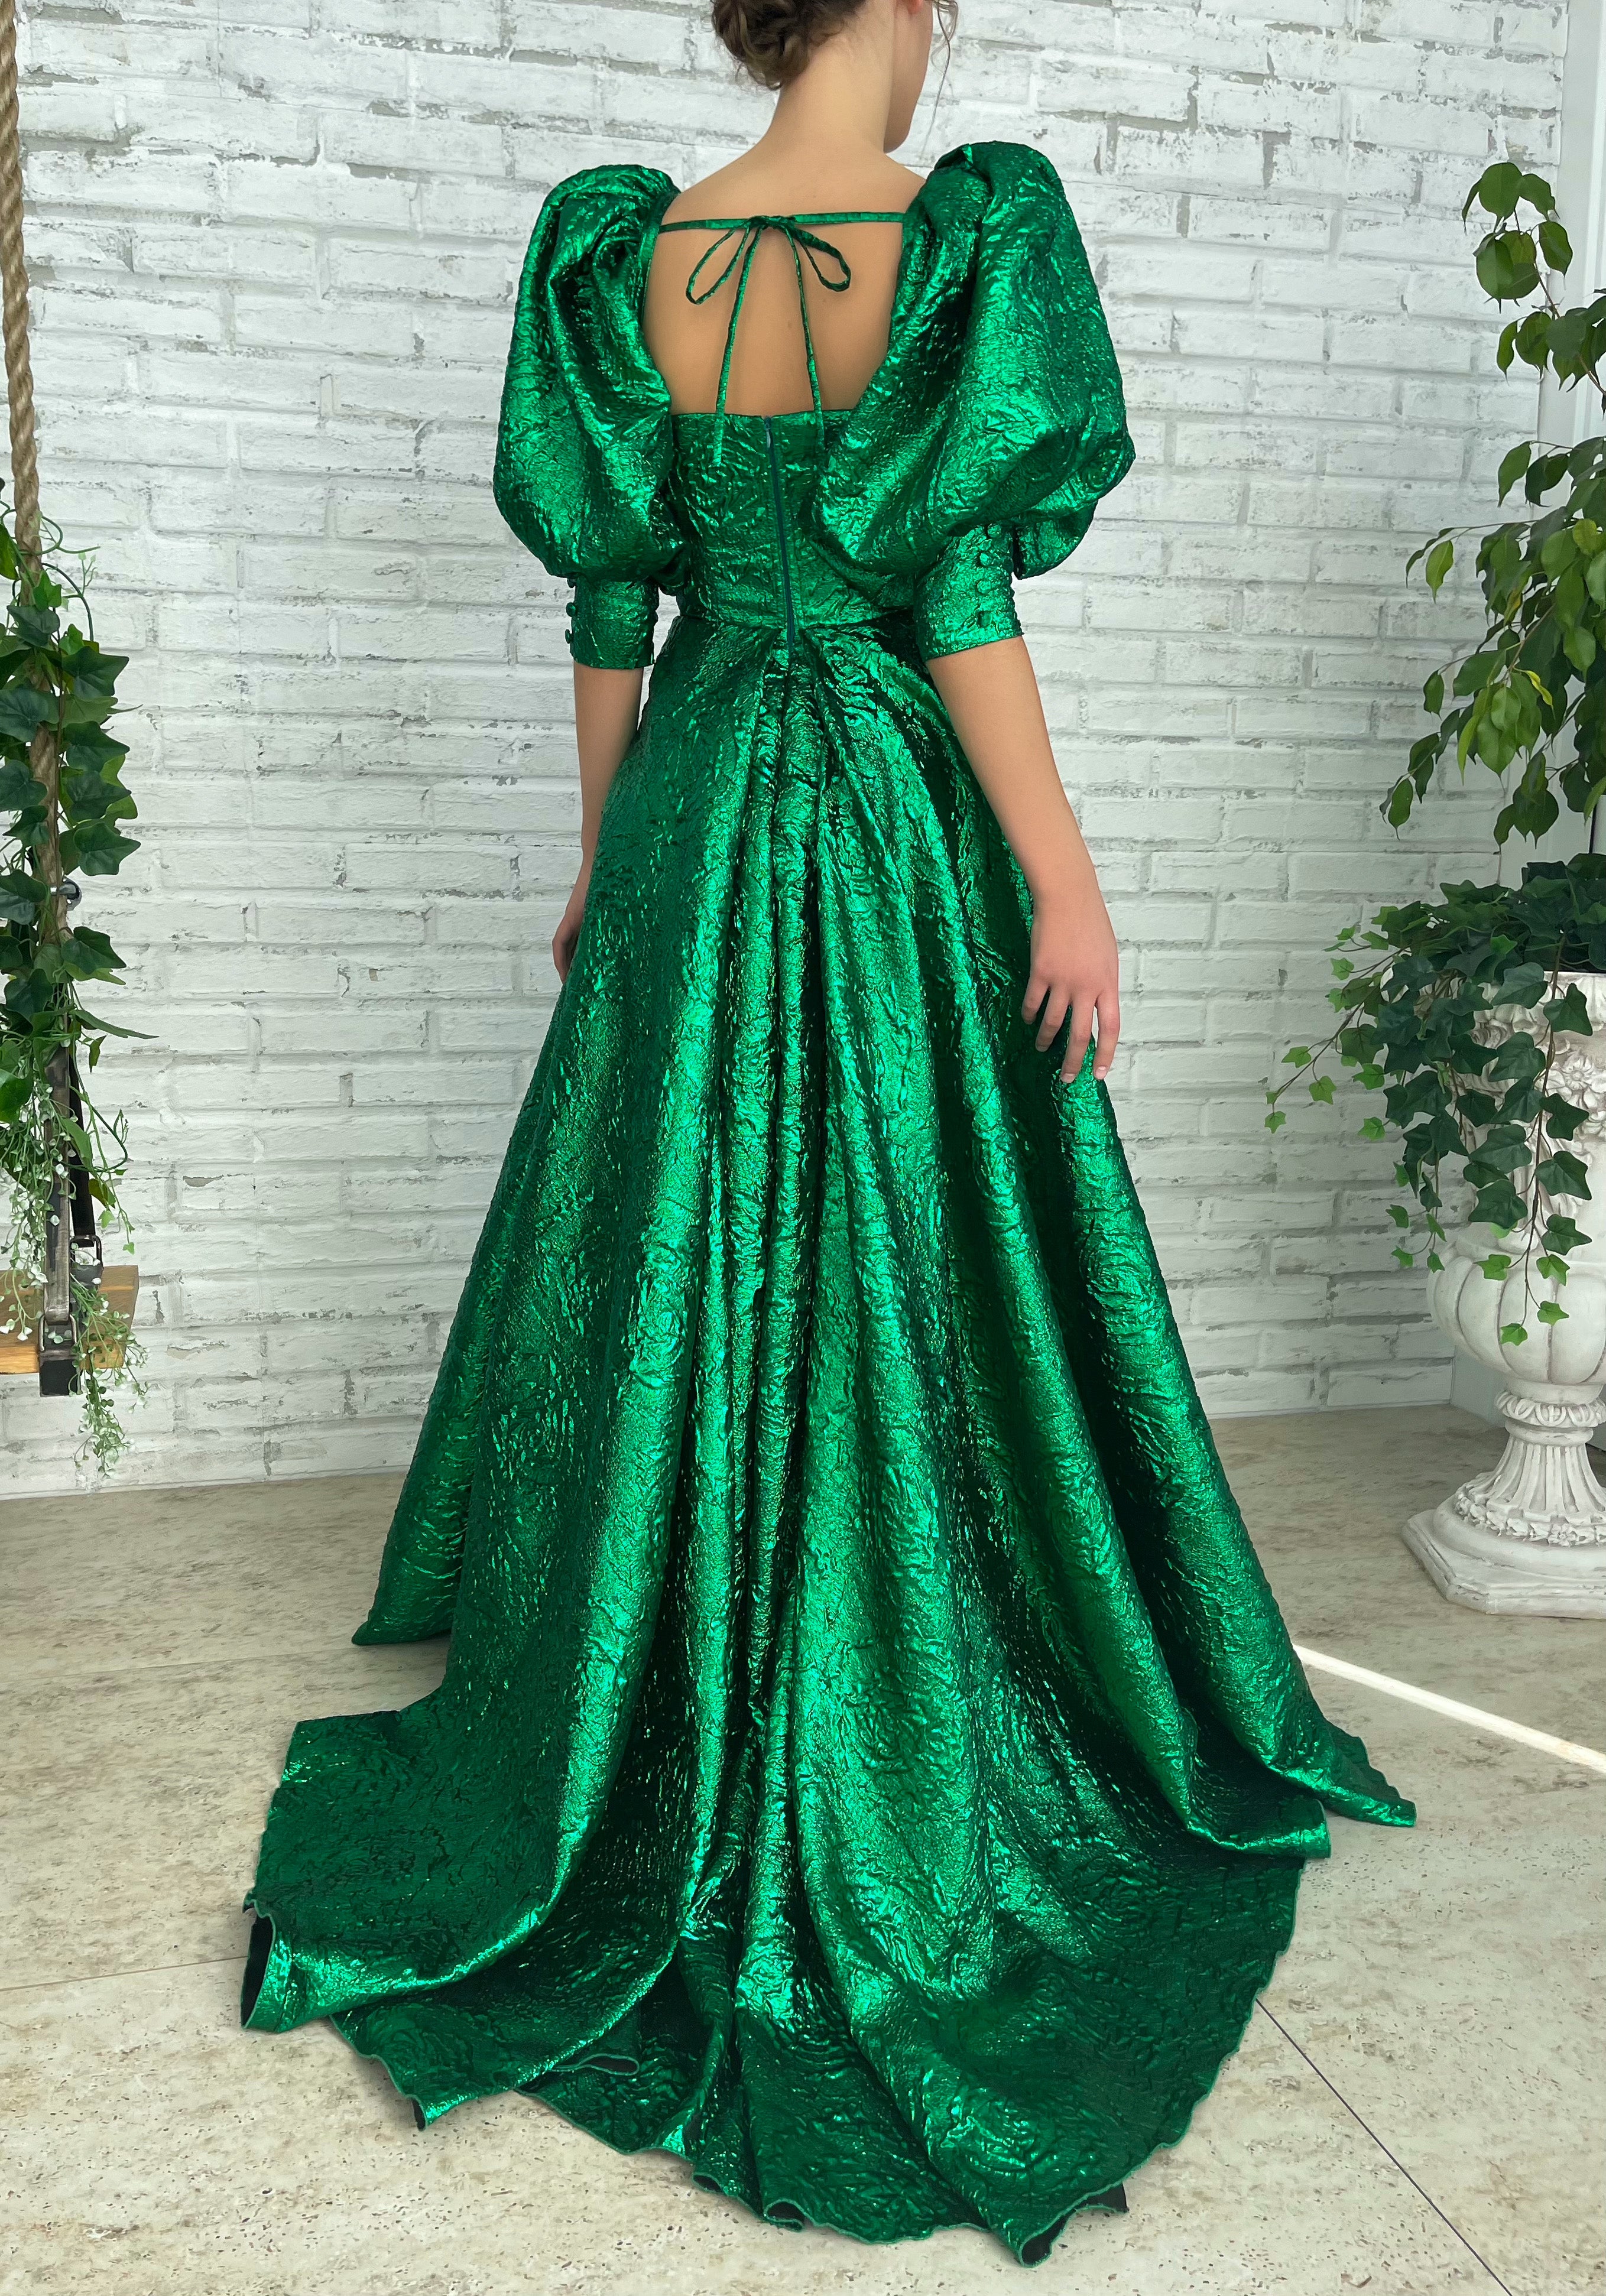 Green A-Line dress with short puff sleeves